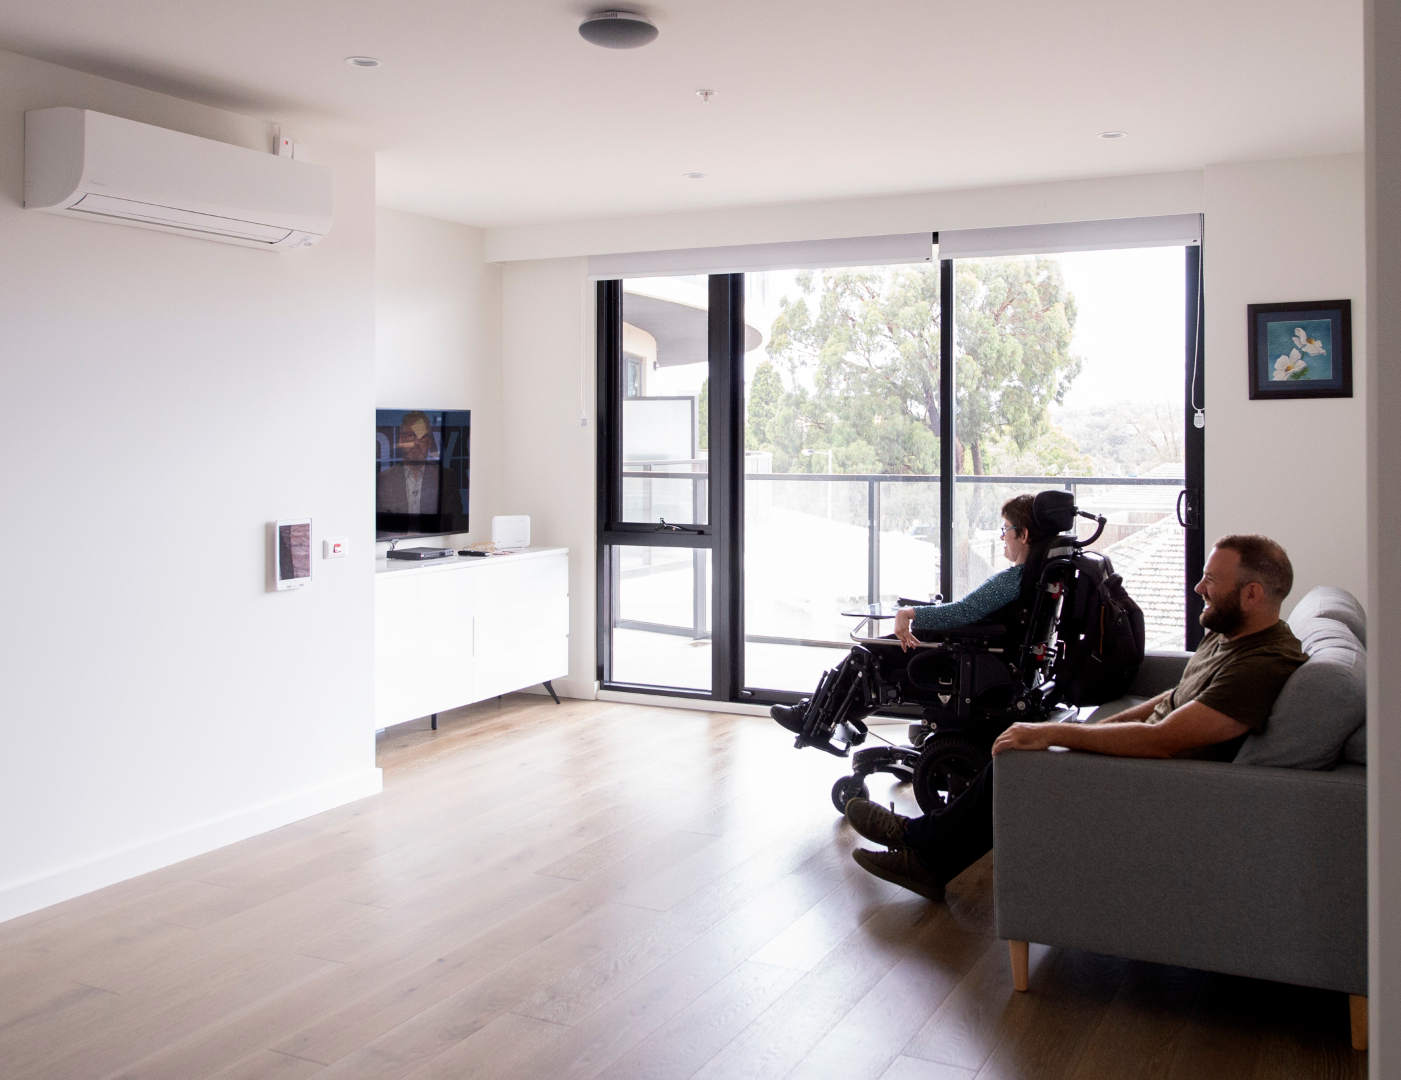 NDIS participant in the living area of an SDA property.